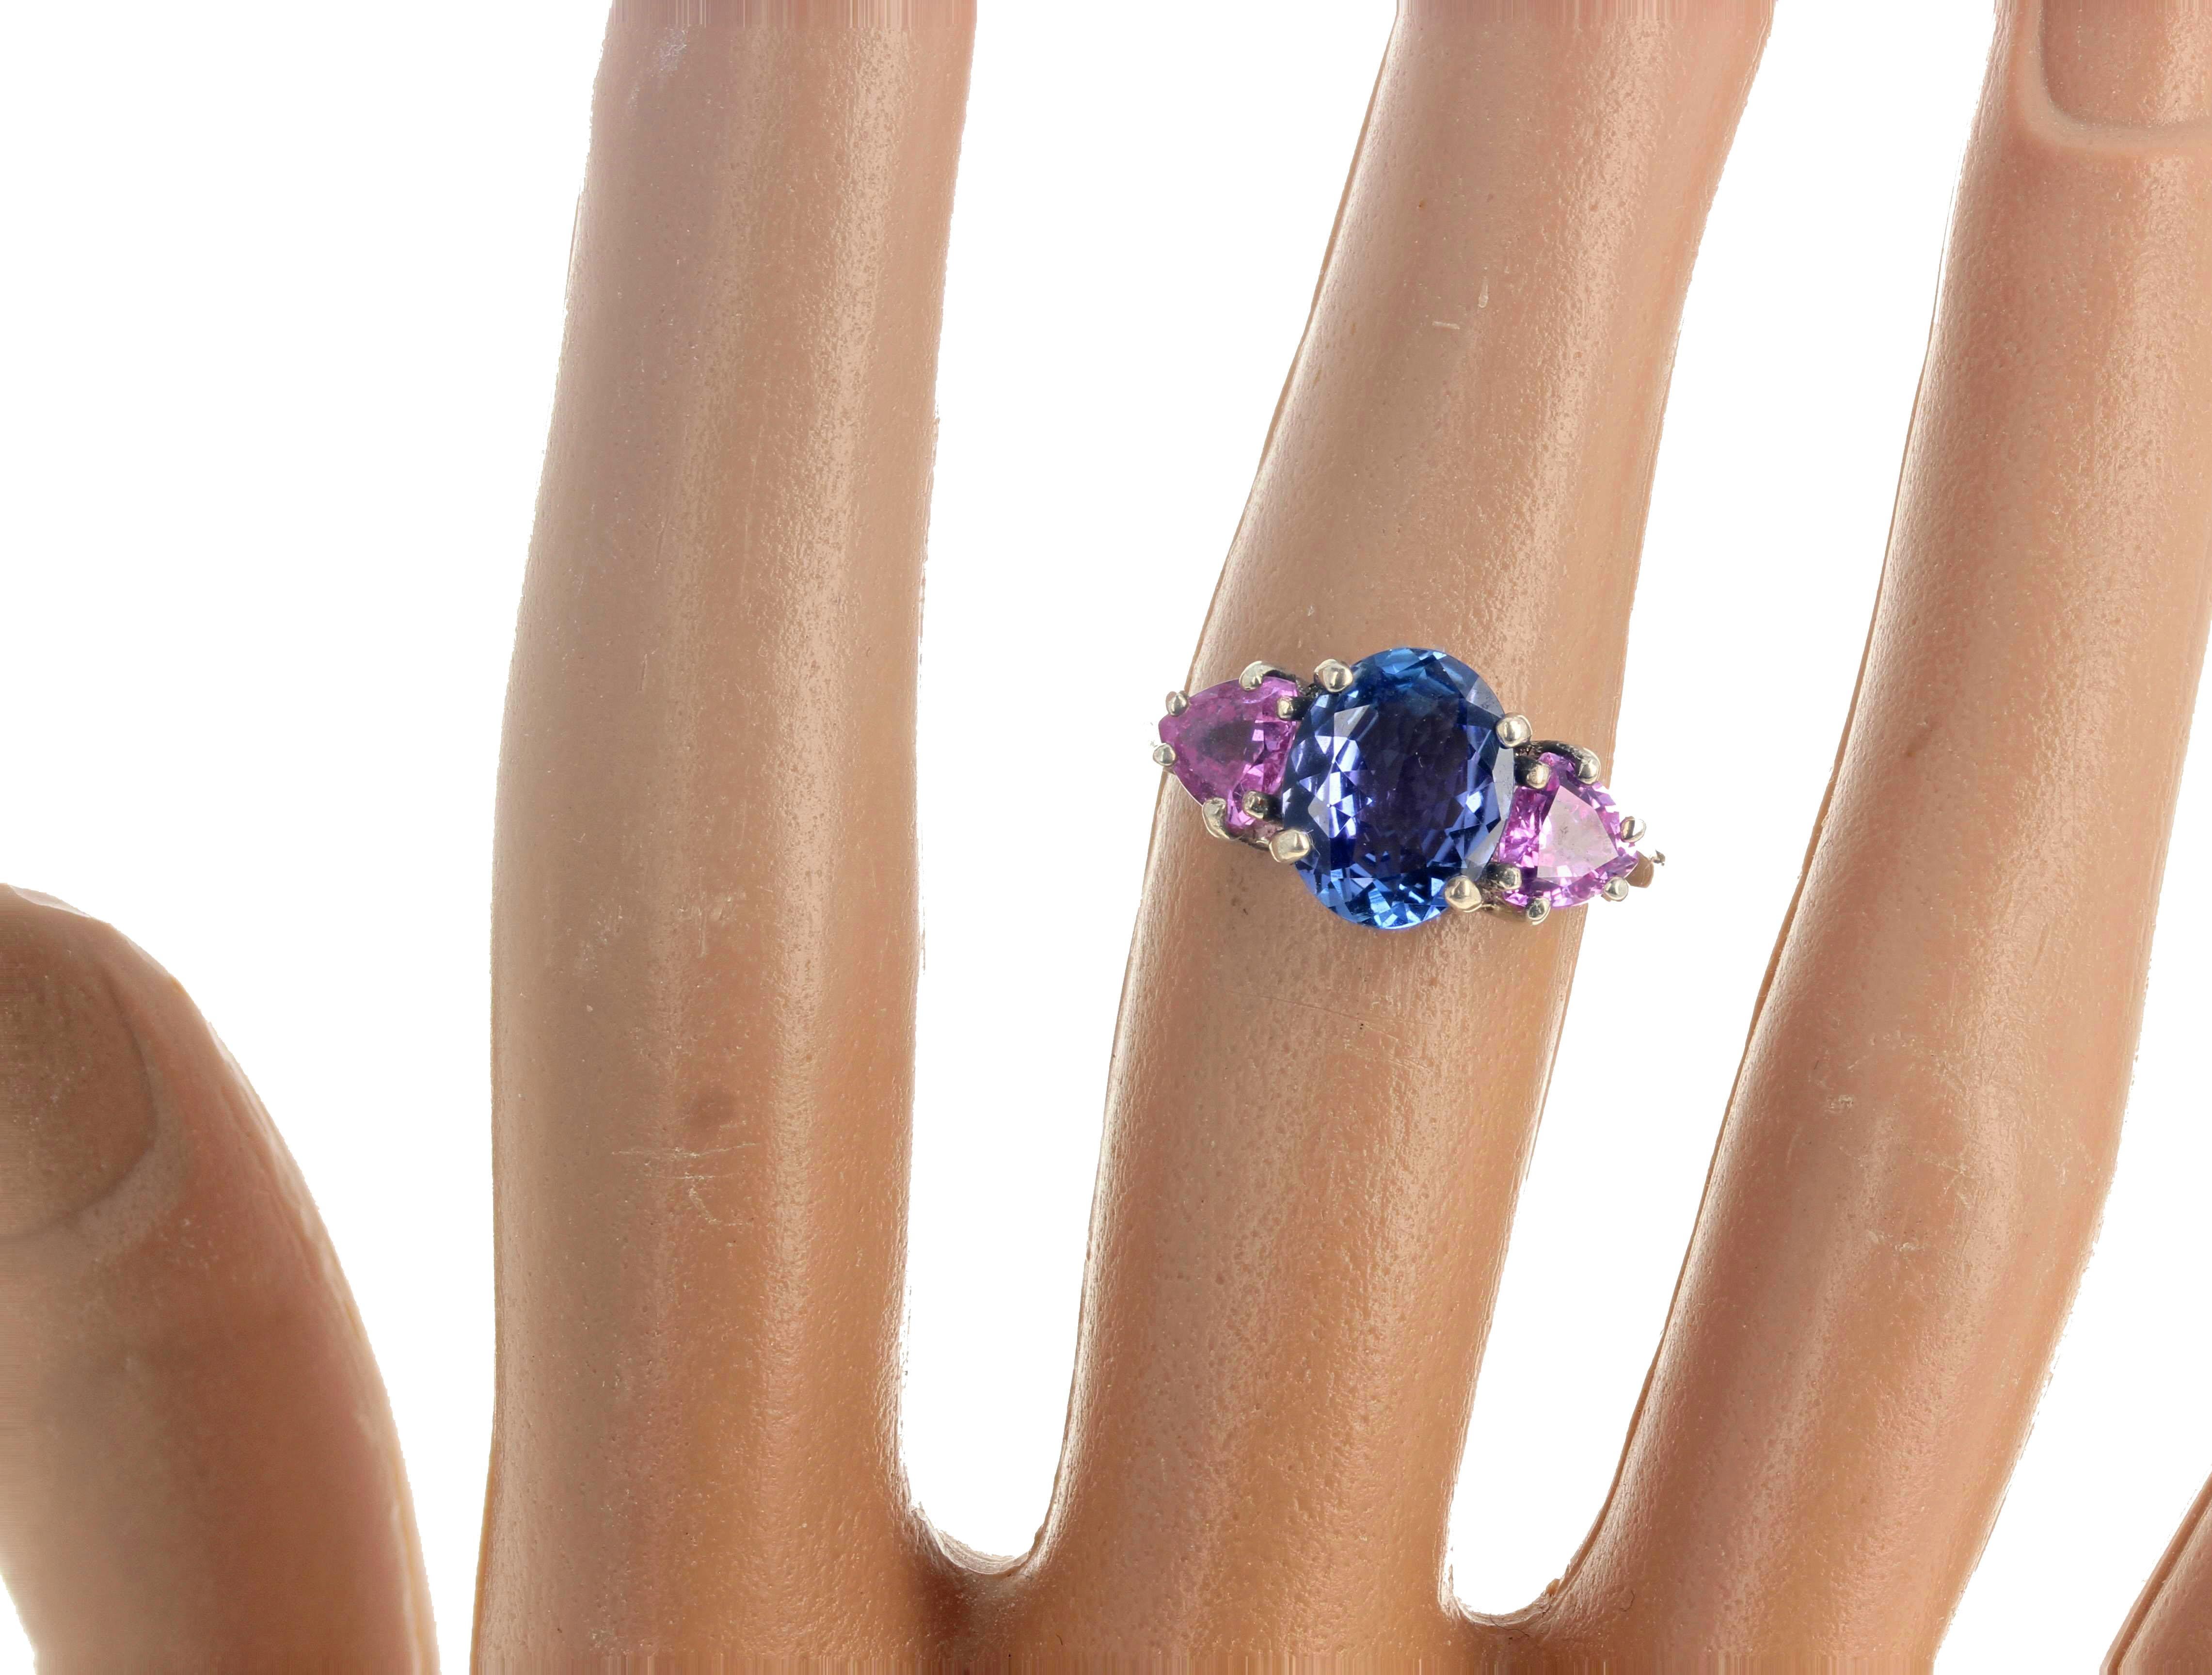 This petite brilliant blue natural 2.15 carat Tanzanite (10 mm x 8 mm) center gemstone is flanked by two natural sparkling intense pink Sapphires ( 5.5mm x 5.5mm - 0.45 carats each approximately).  Set in sterling silver this ring is size 7